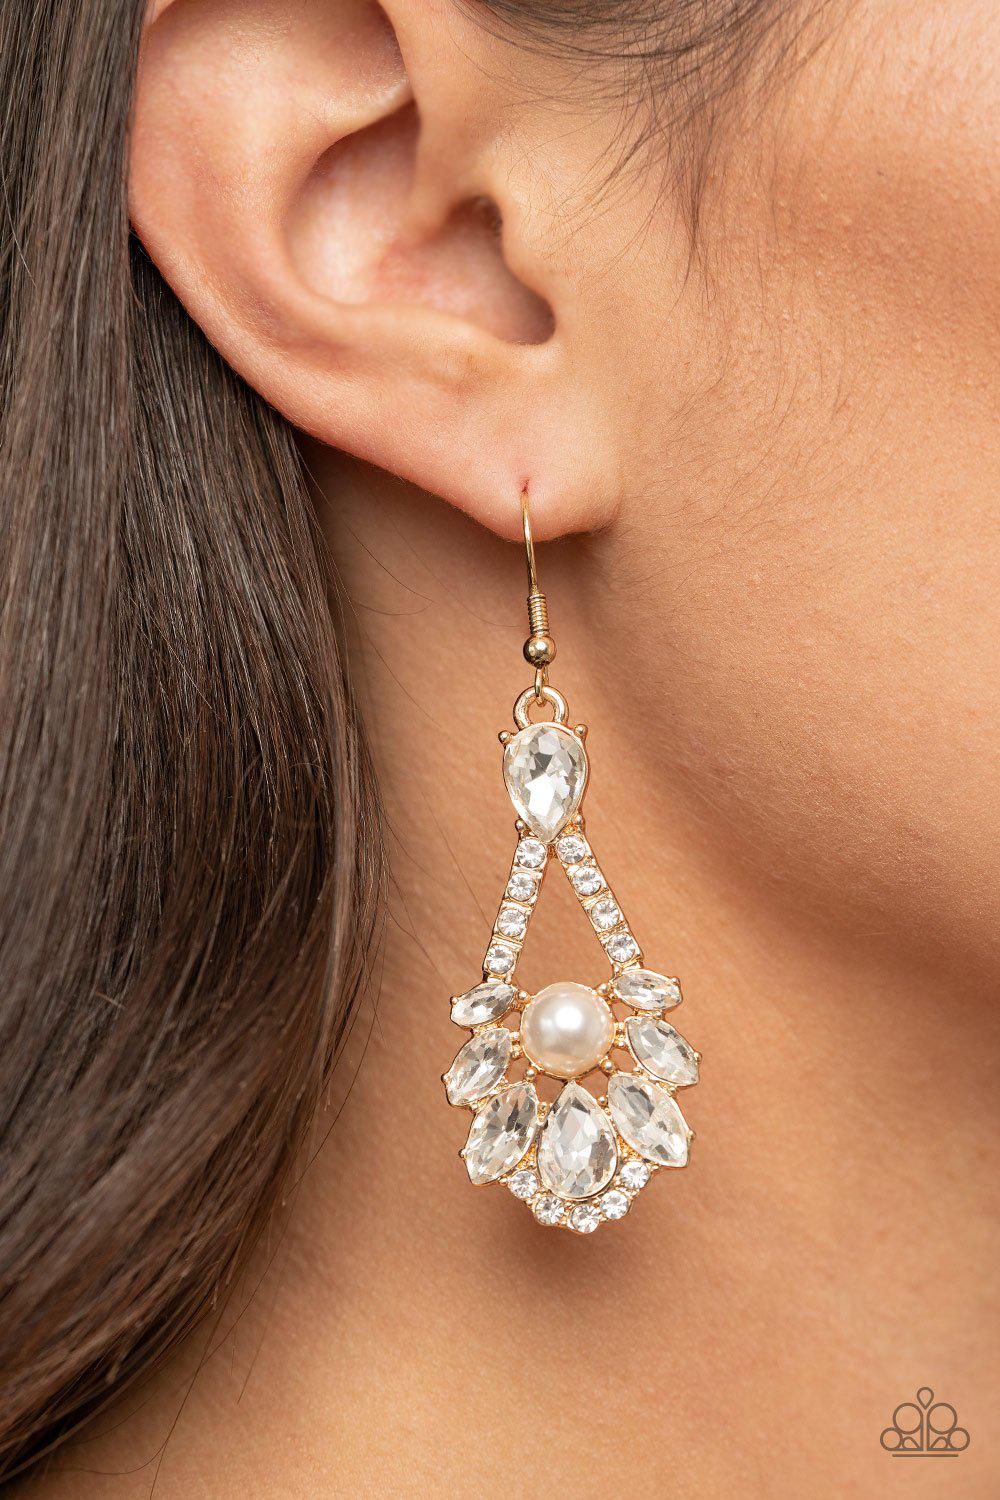 Prismatic Presence Gold and White Rhinestone and Pearl Earrings - Paparazzi Accessories Life of the Party Exclusive February 2021 - model -CarasShop.com - $5 Jewelry by Cara Jewels